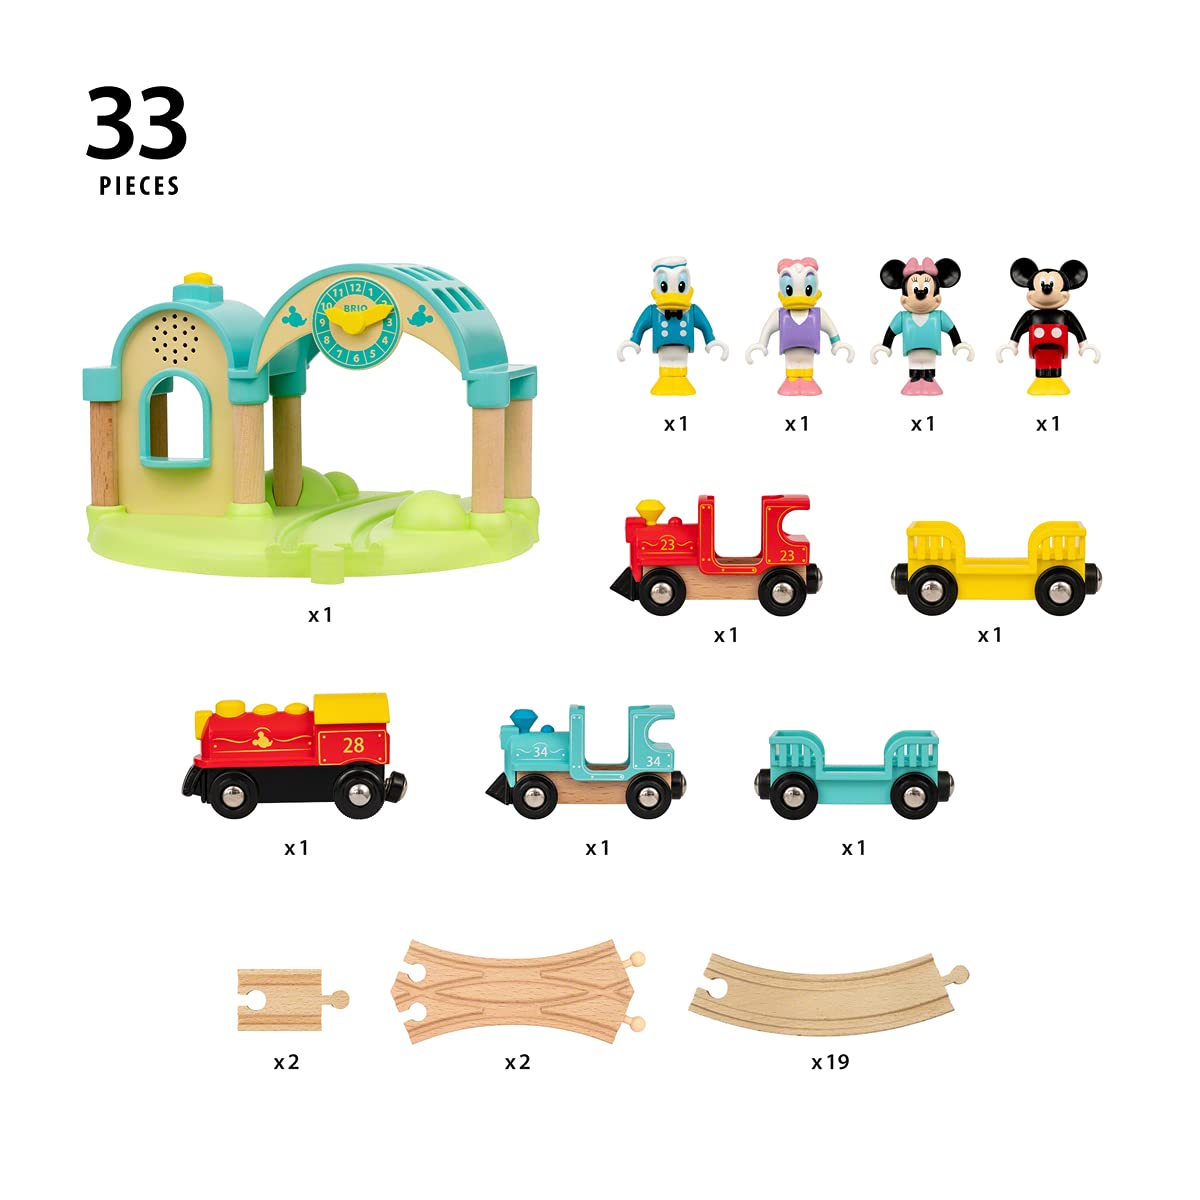 BRIO 32292 Disney Mickey's Deluxe Wooden Railway Set | Wooden Toy Train Set for Kids Age 3 and Up